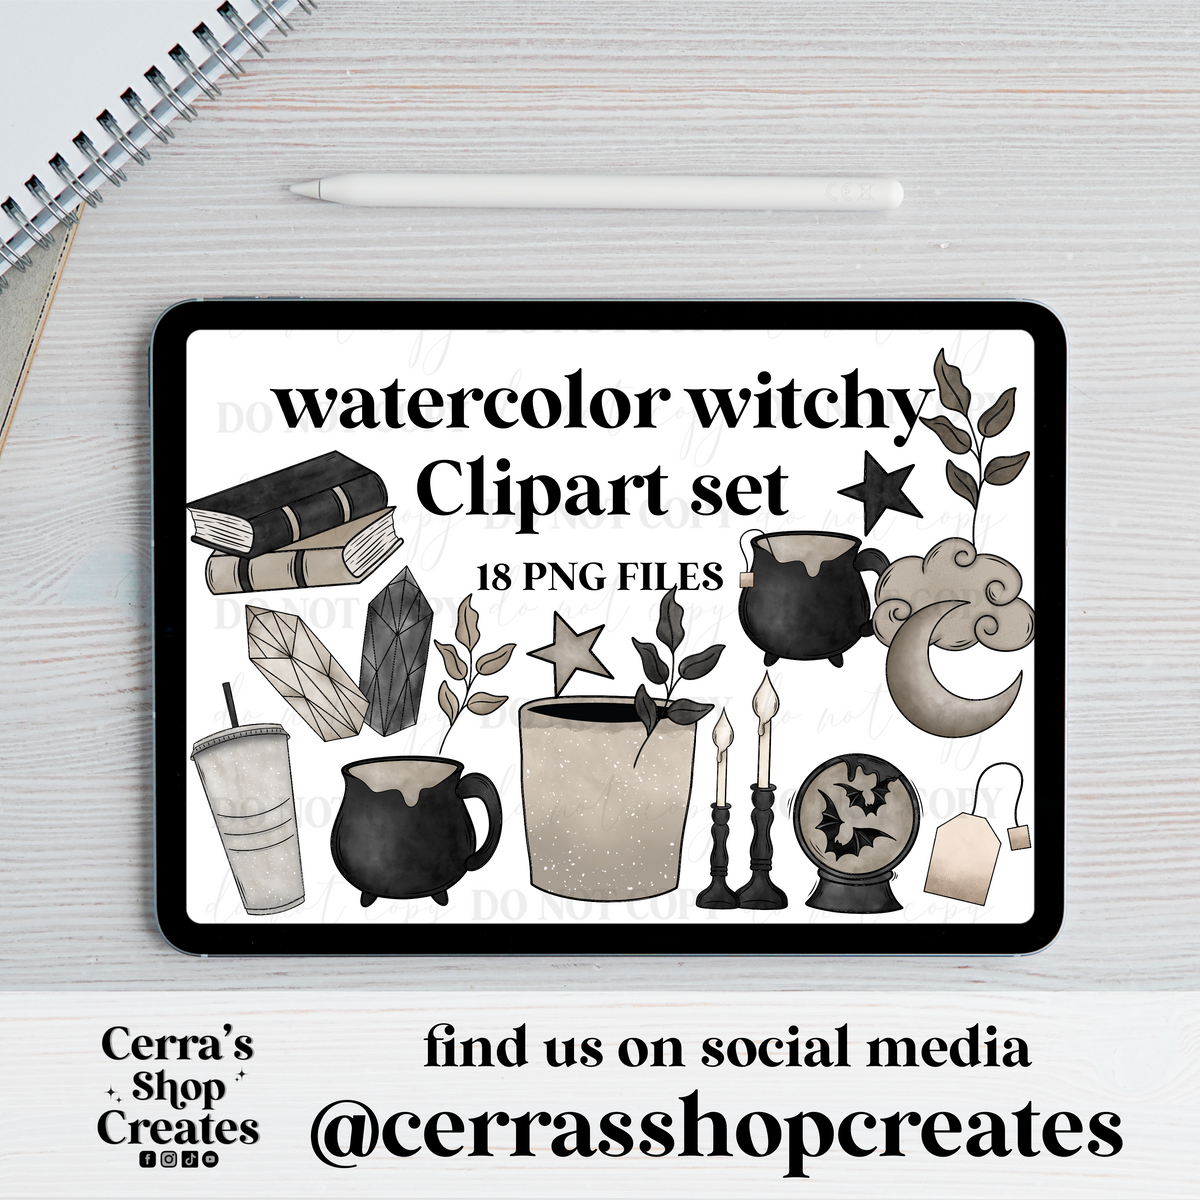 Watercolor Witchy Clipart